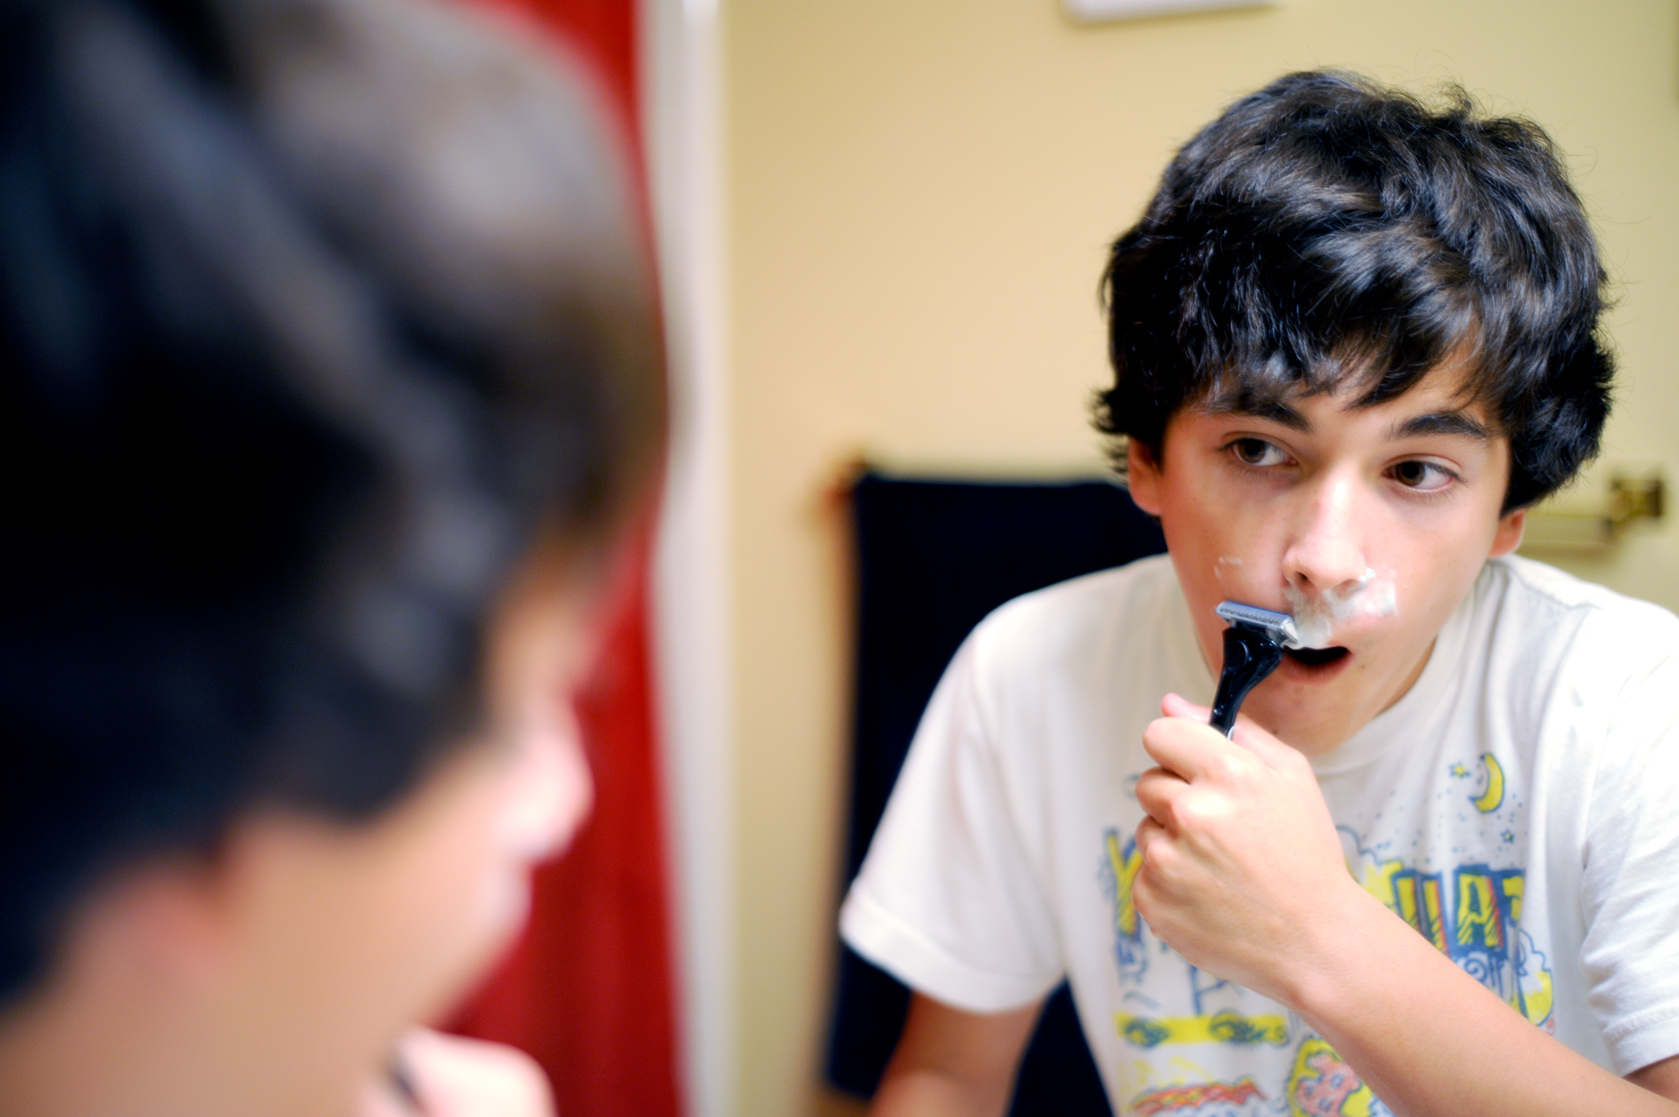 Males often start shaving during puberty.^[[Image](https://www.flickr.com/photos/alanant/3851416310) by [Antiporda Productions](https://www.flickr.com/photos/alanant/) is licensed under [CC BY 2.0](https://creativecommons.org/licenses/by/2.0/)]